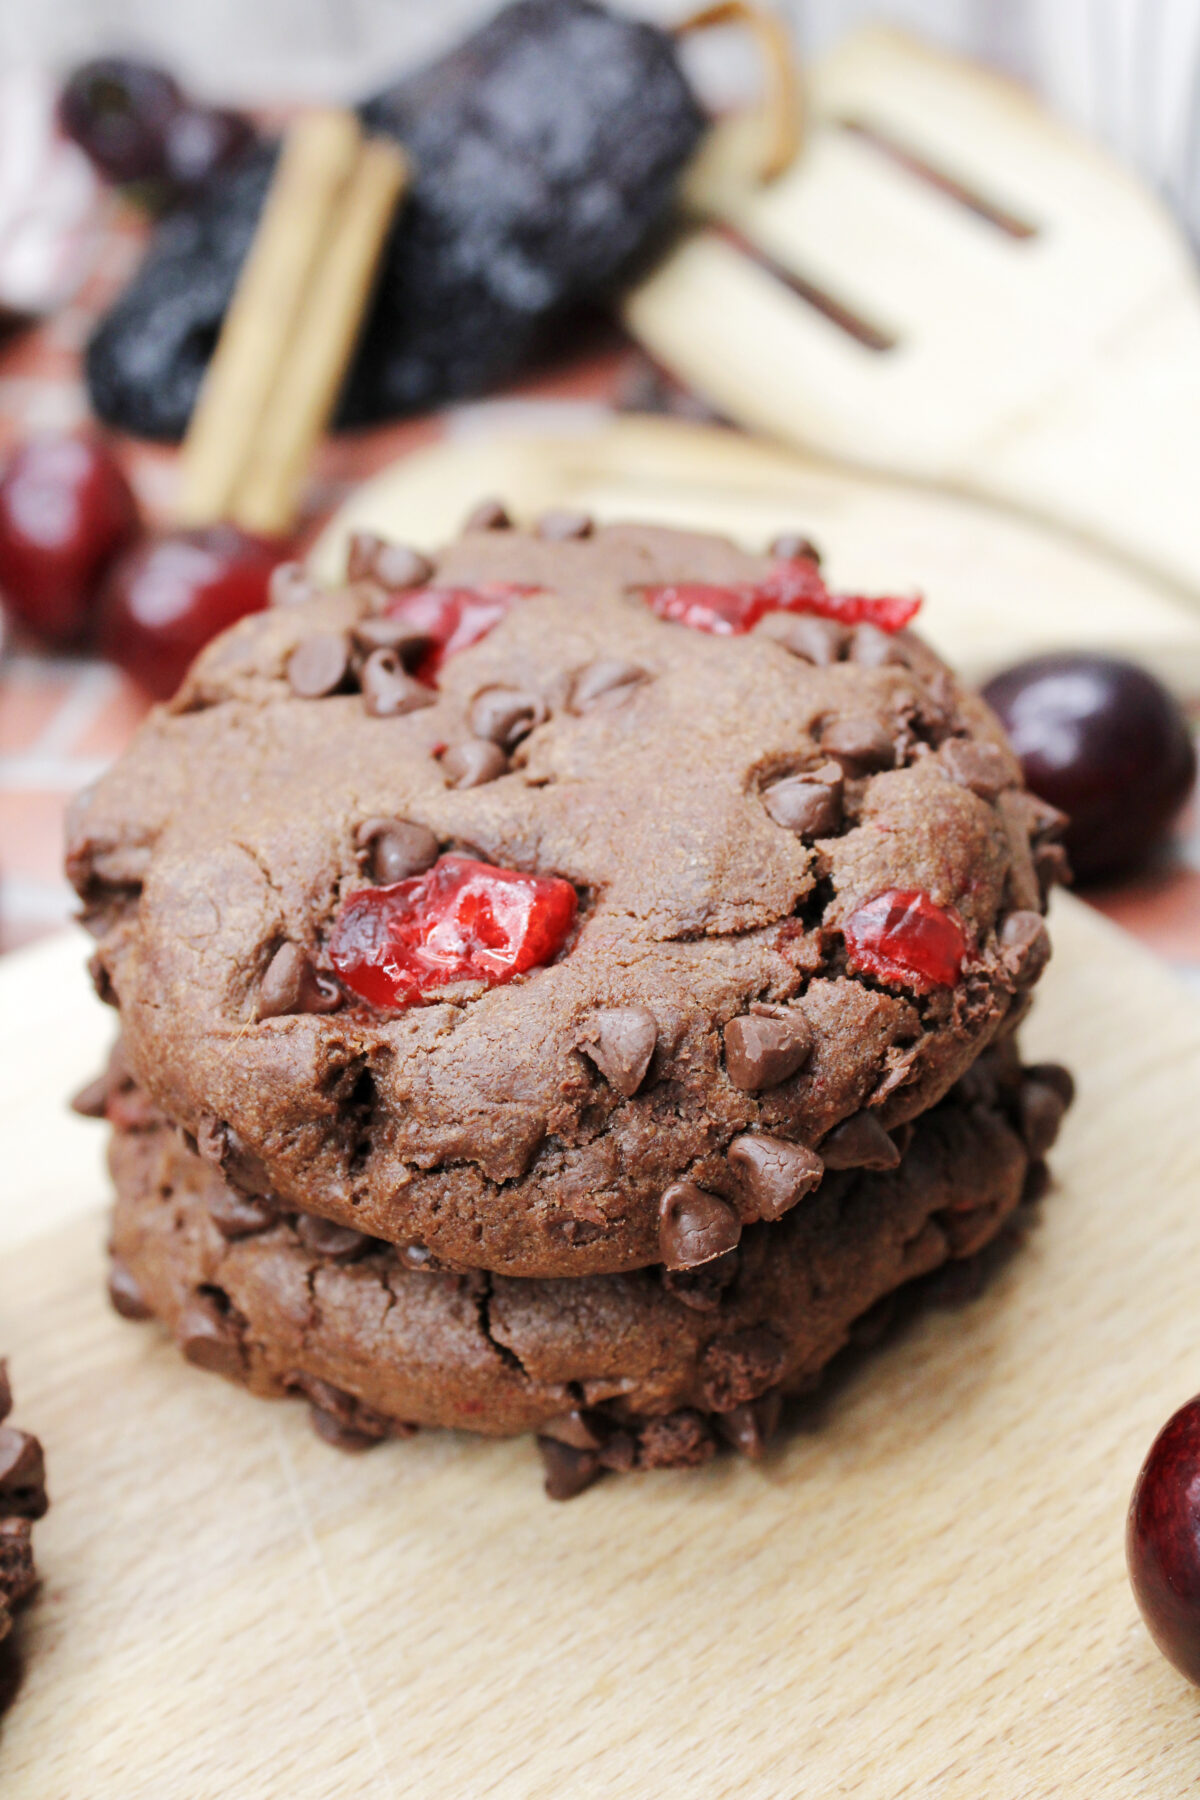 Try something special with this spiced chocolate cherry cookies recipe. It's the perfect balance of sweet, spicy, and oh-so-delicious!